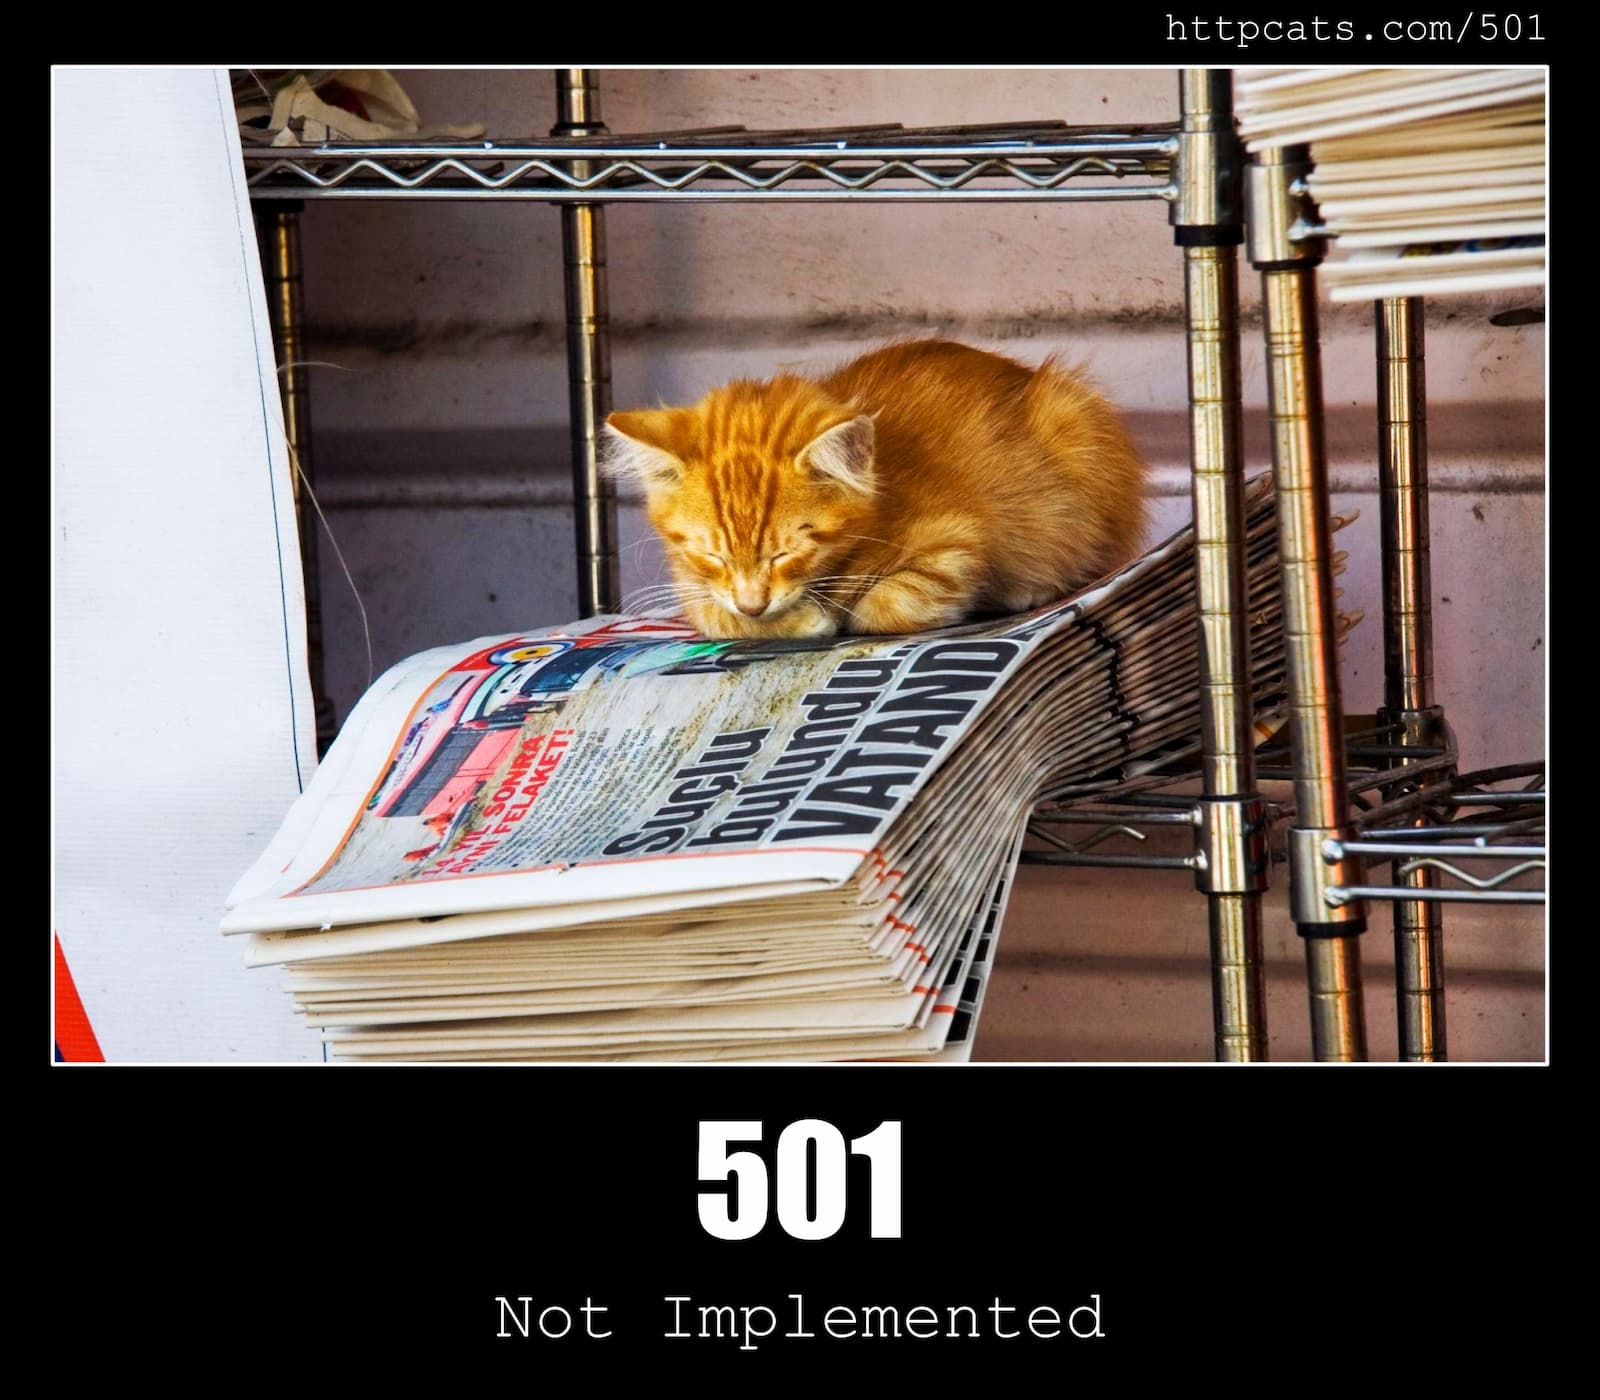 HTTP Status Code 501 Not Implemented & Cats